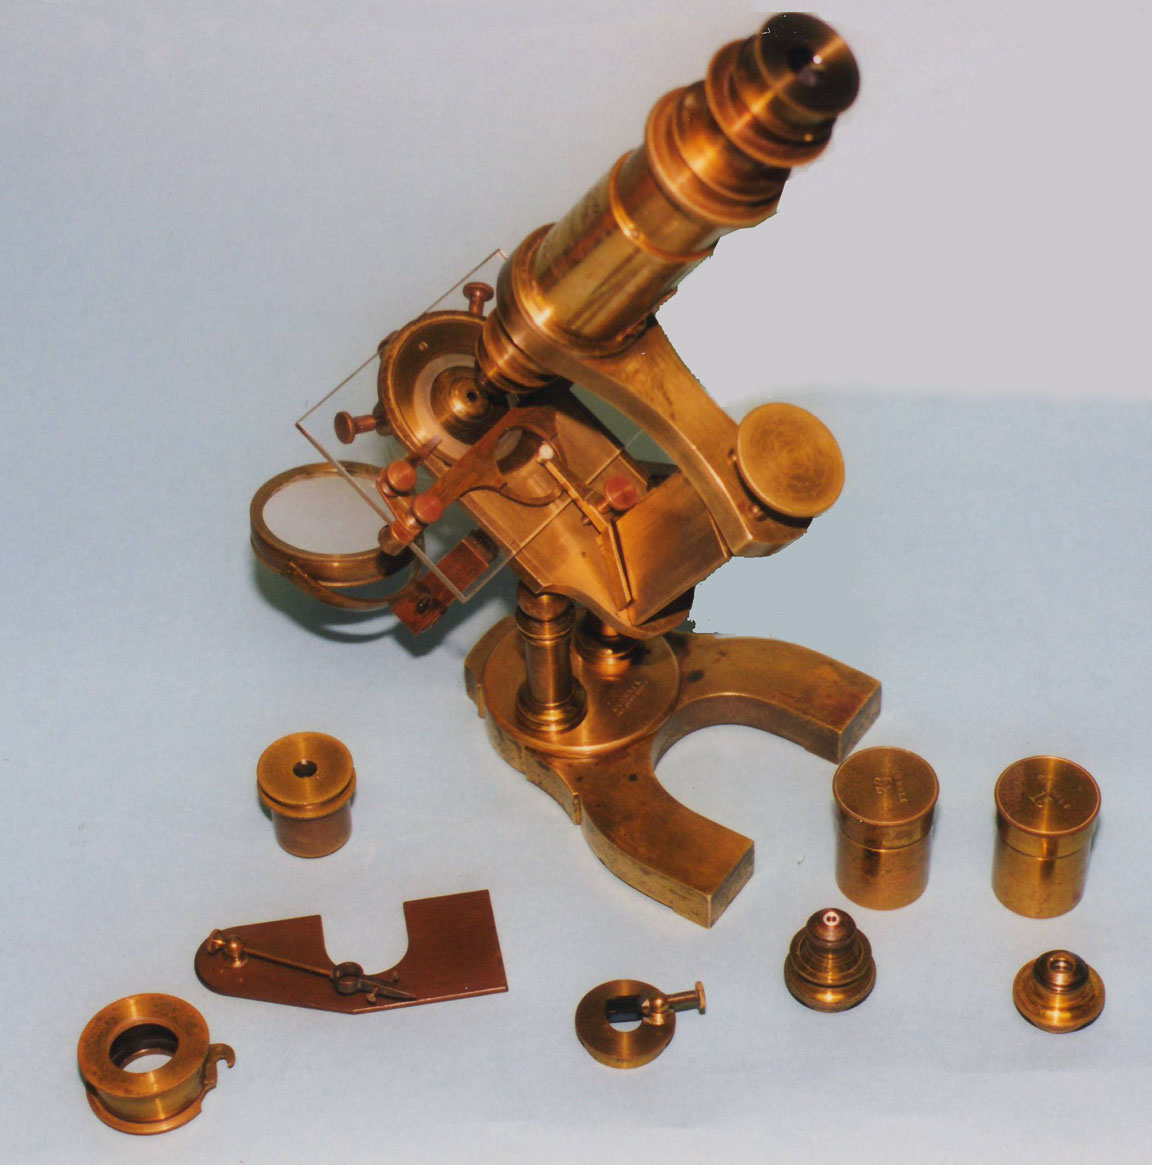 Wale Microscope with Accessories